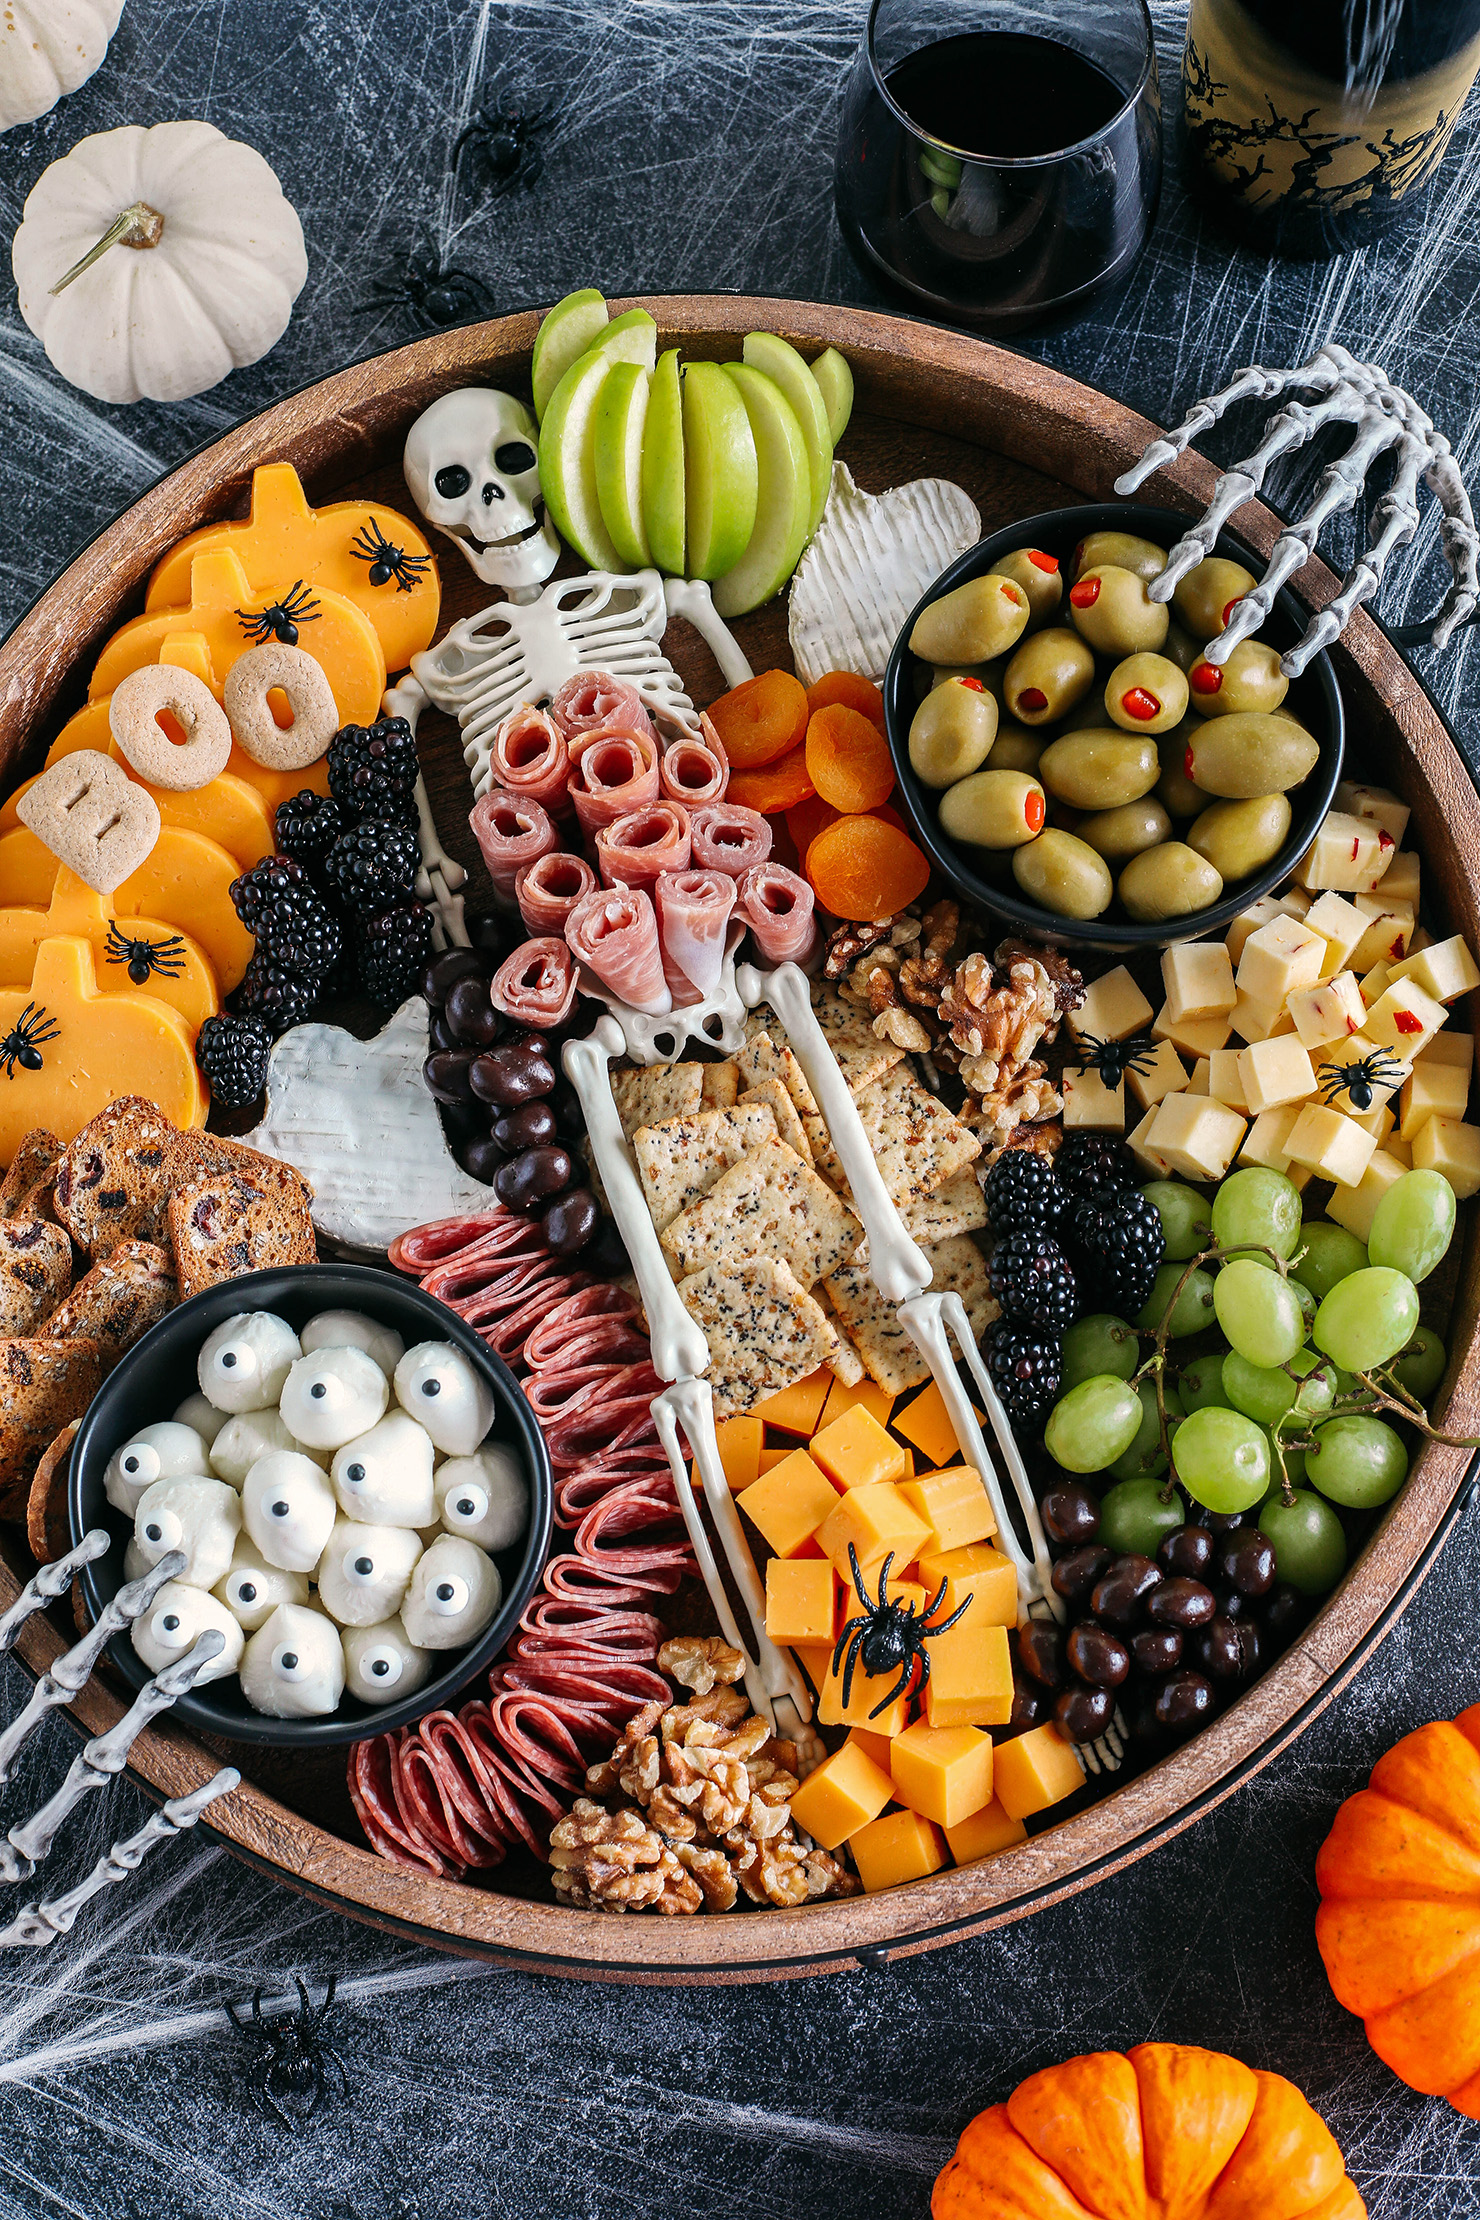 Build the spookiest Halloween Charcuterie Board perfect for your next party!  Filled with an assortment of your favorite cheeses, meats, crackers, fresh fruits, nuts and other fun ghoulish treats!